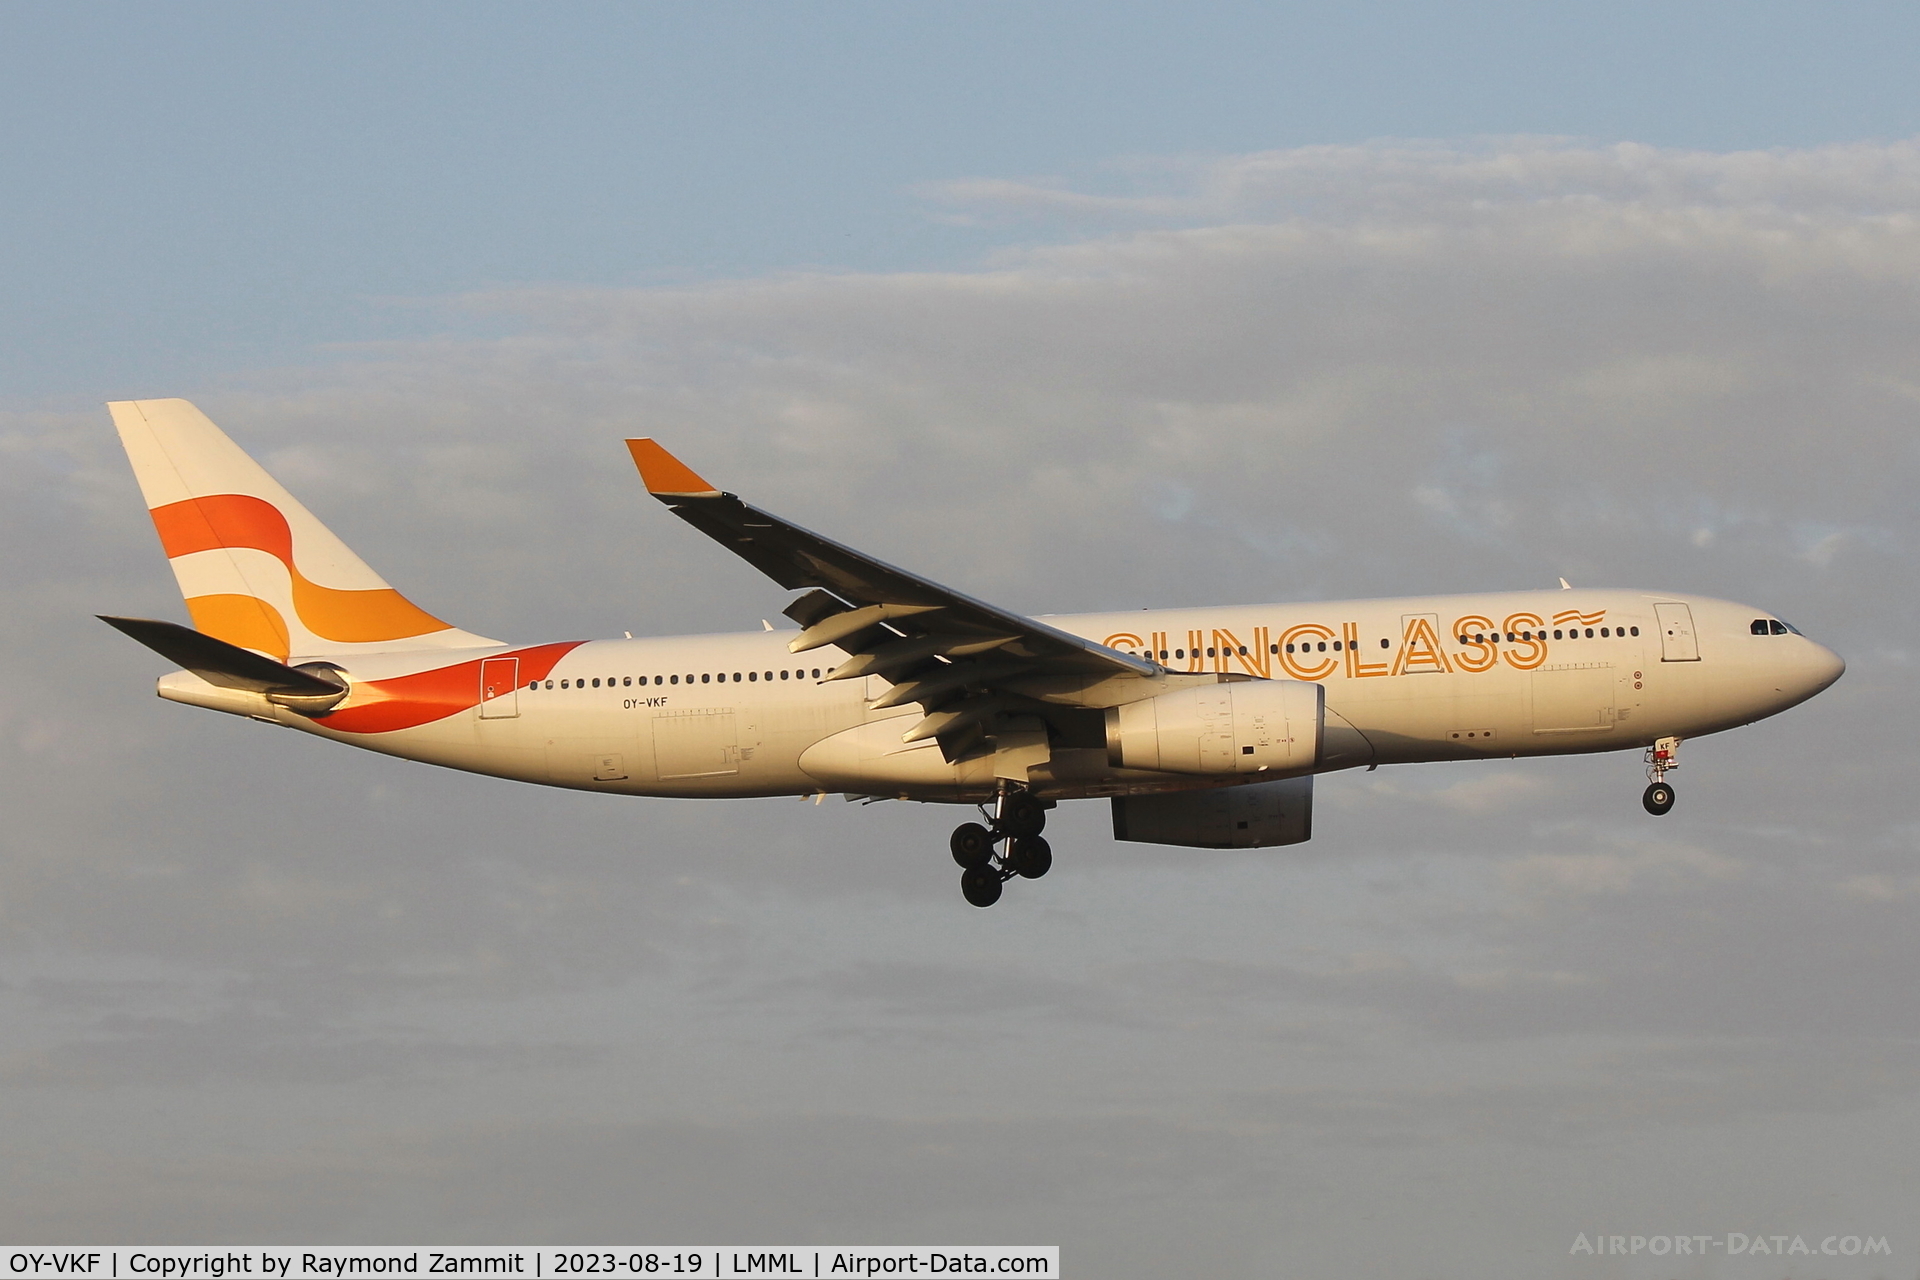 OY-VKF, 1999 Airbus A330-243 C/N 309, A330 OY-VKF Sunclass Airlines